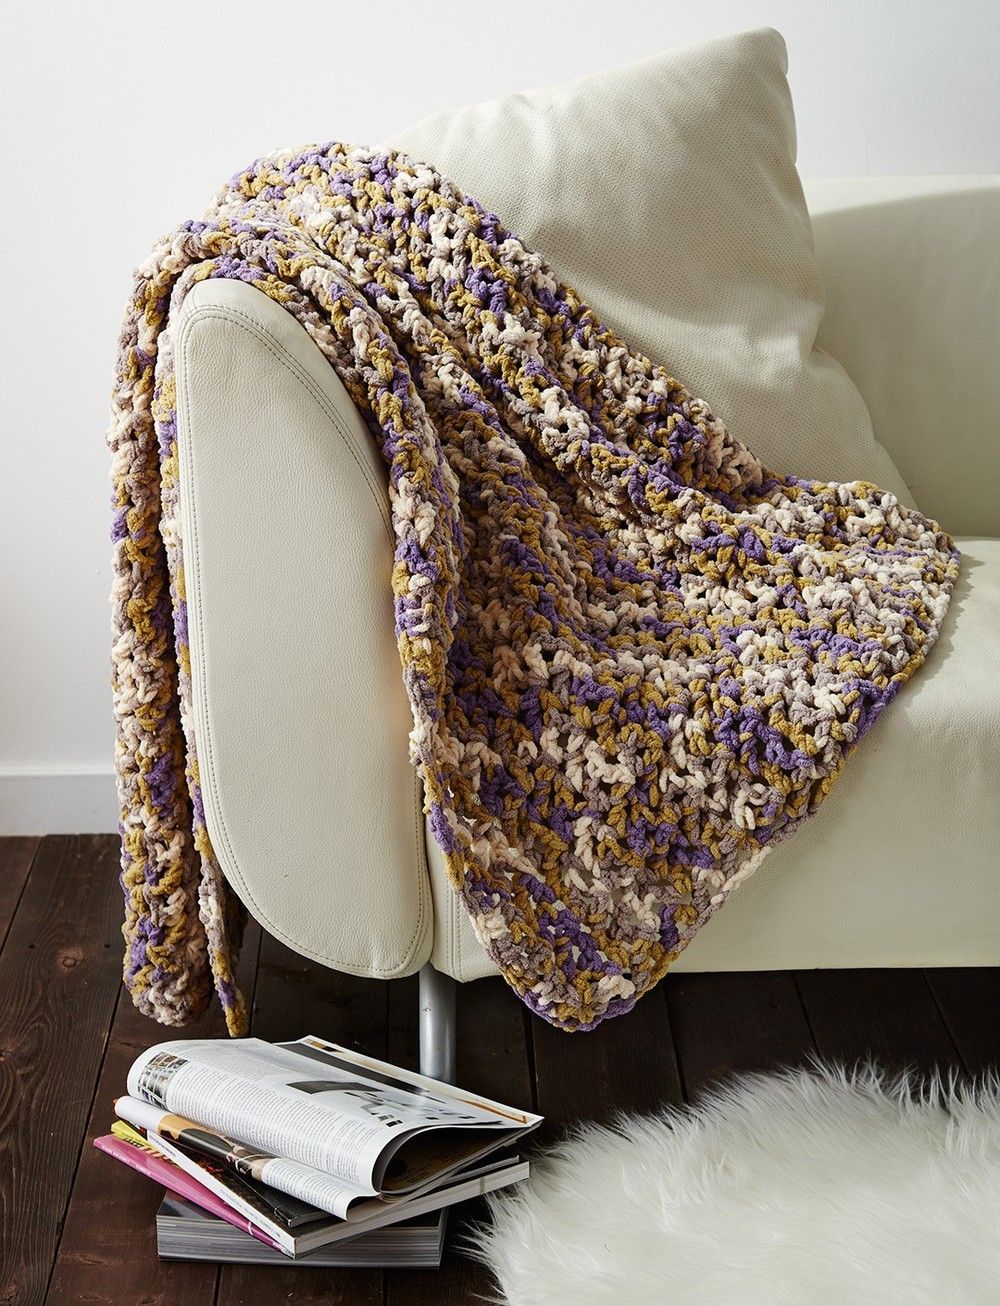 Need to make a crochet afghan quick? Then the Unbelievably Easy Crochet Blanket is the pattern for you! This chunky crochet